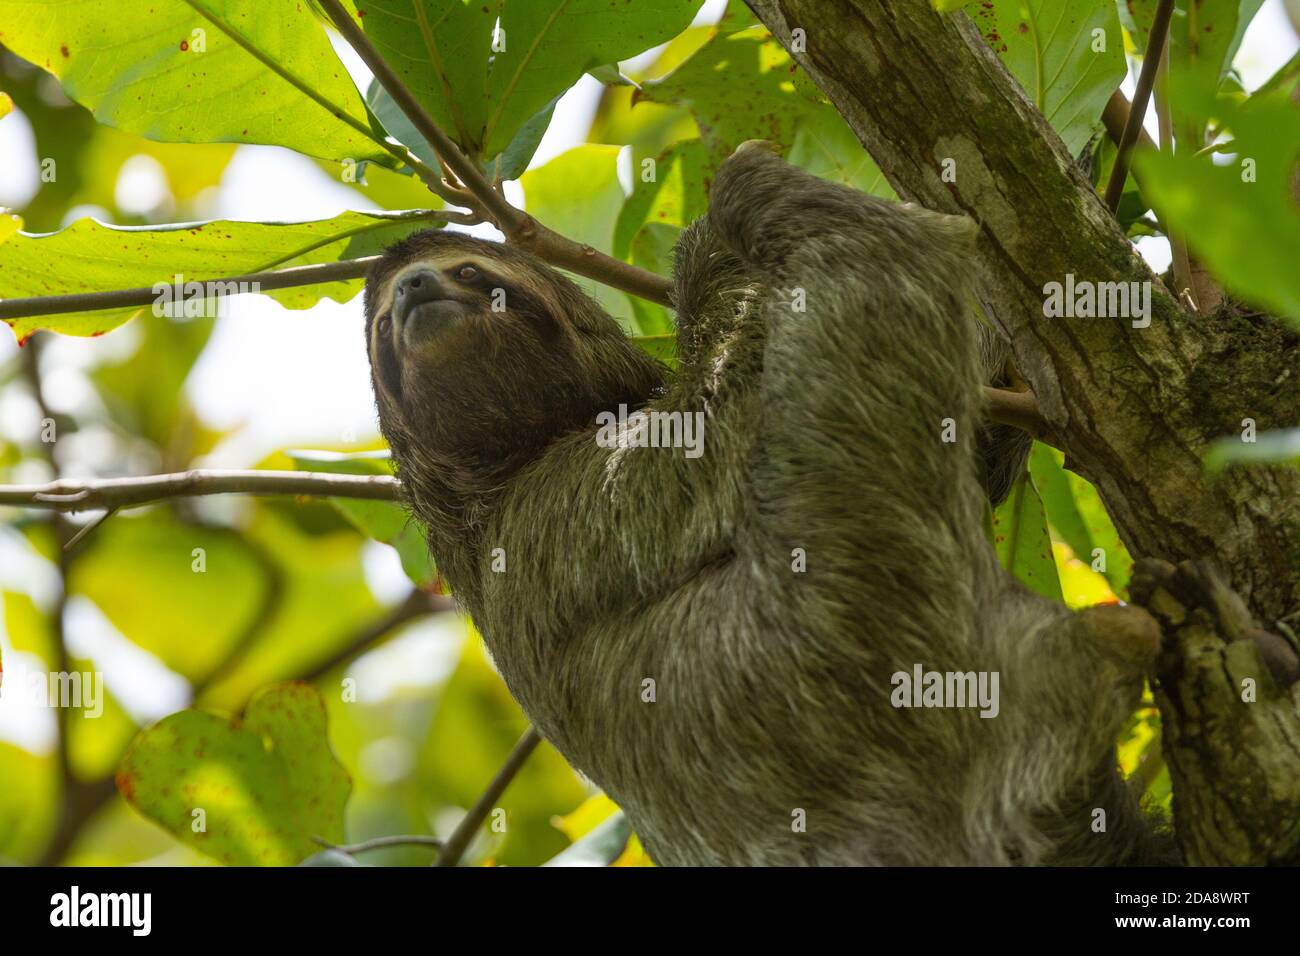 The Brown-throated Sloth, Bradypus variegatus, is a species of Three-toed Sloth found in Central and South America.  Shown here in Costa Rica.  They l Stock Photo